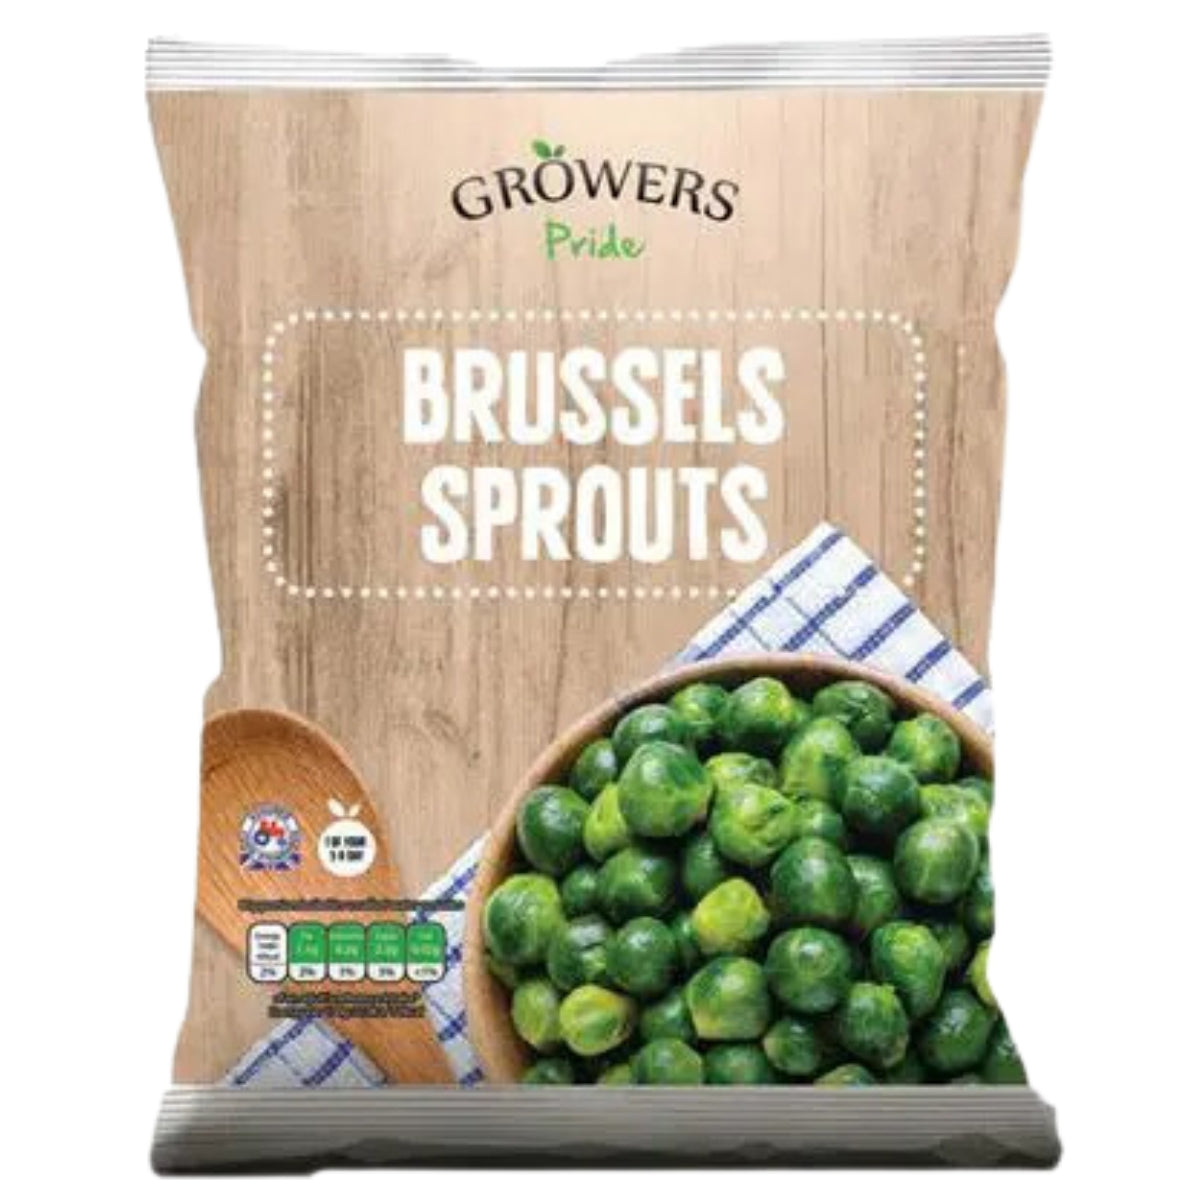 Growers Pride - Brussels Sprouts - 450g.